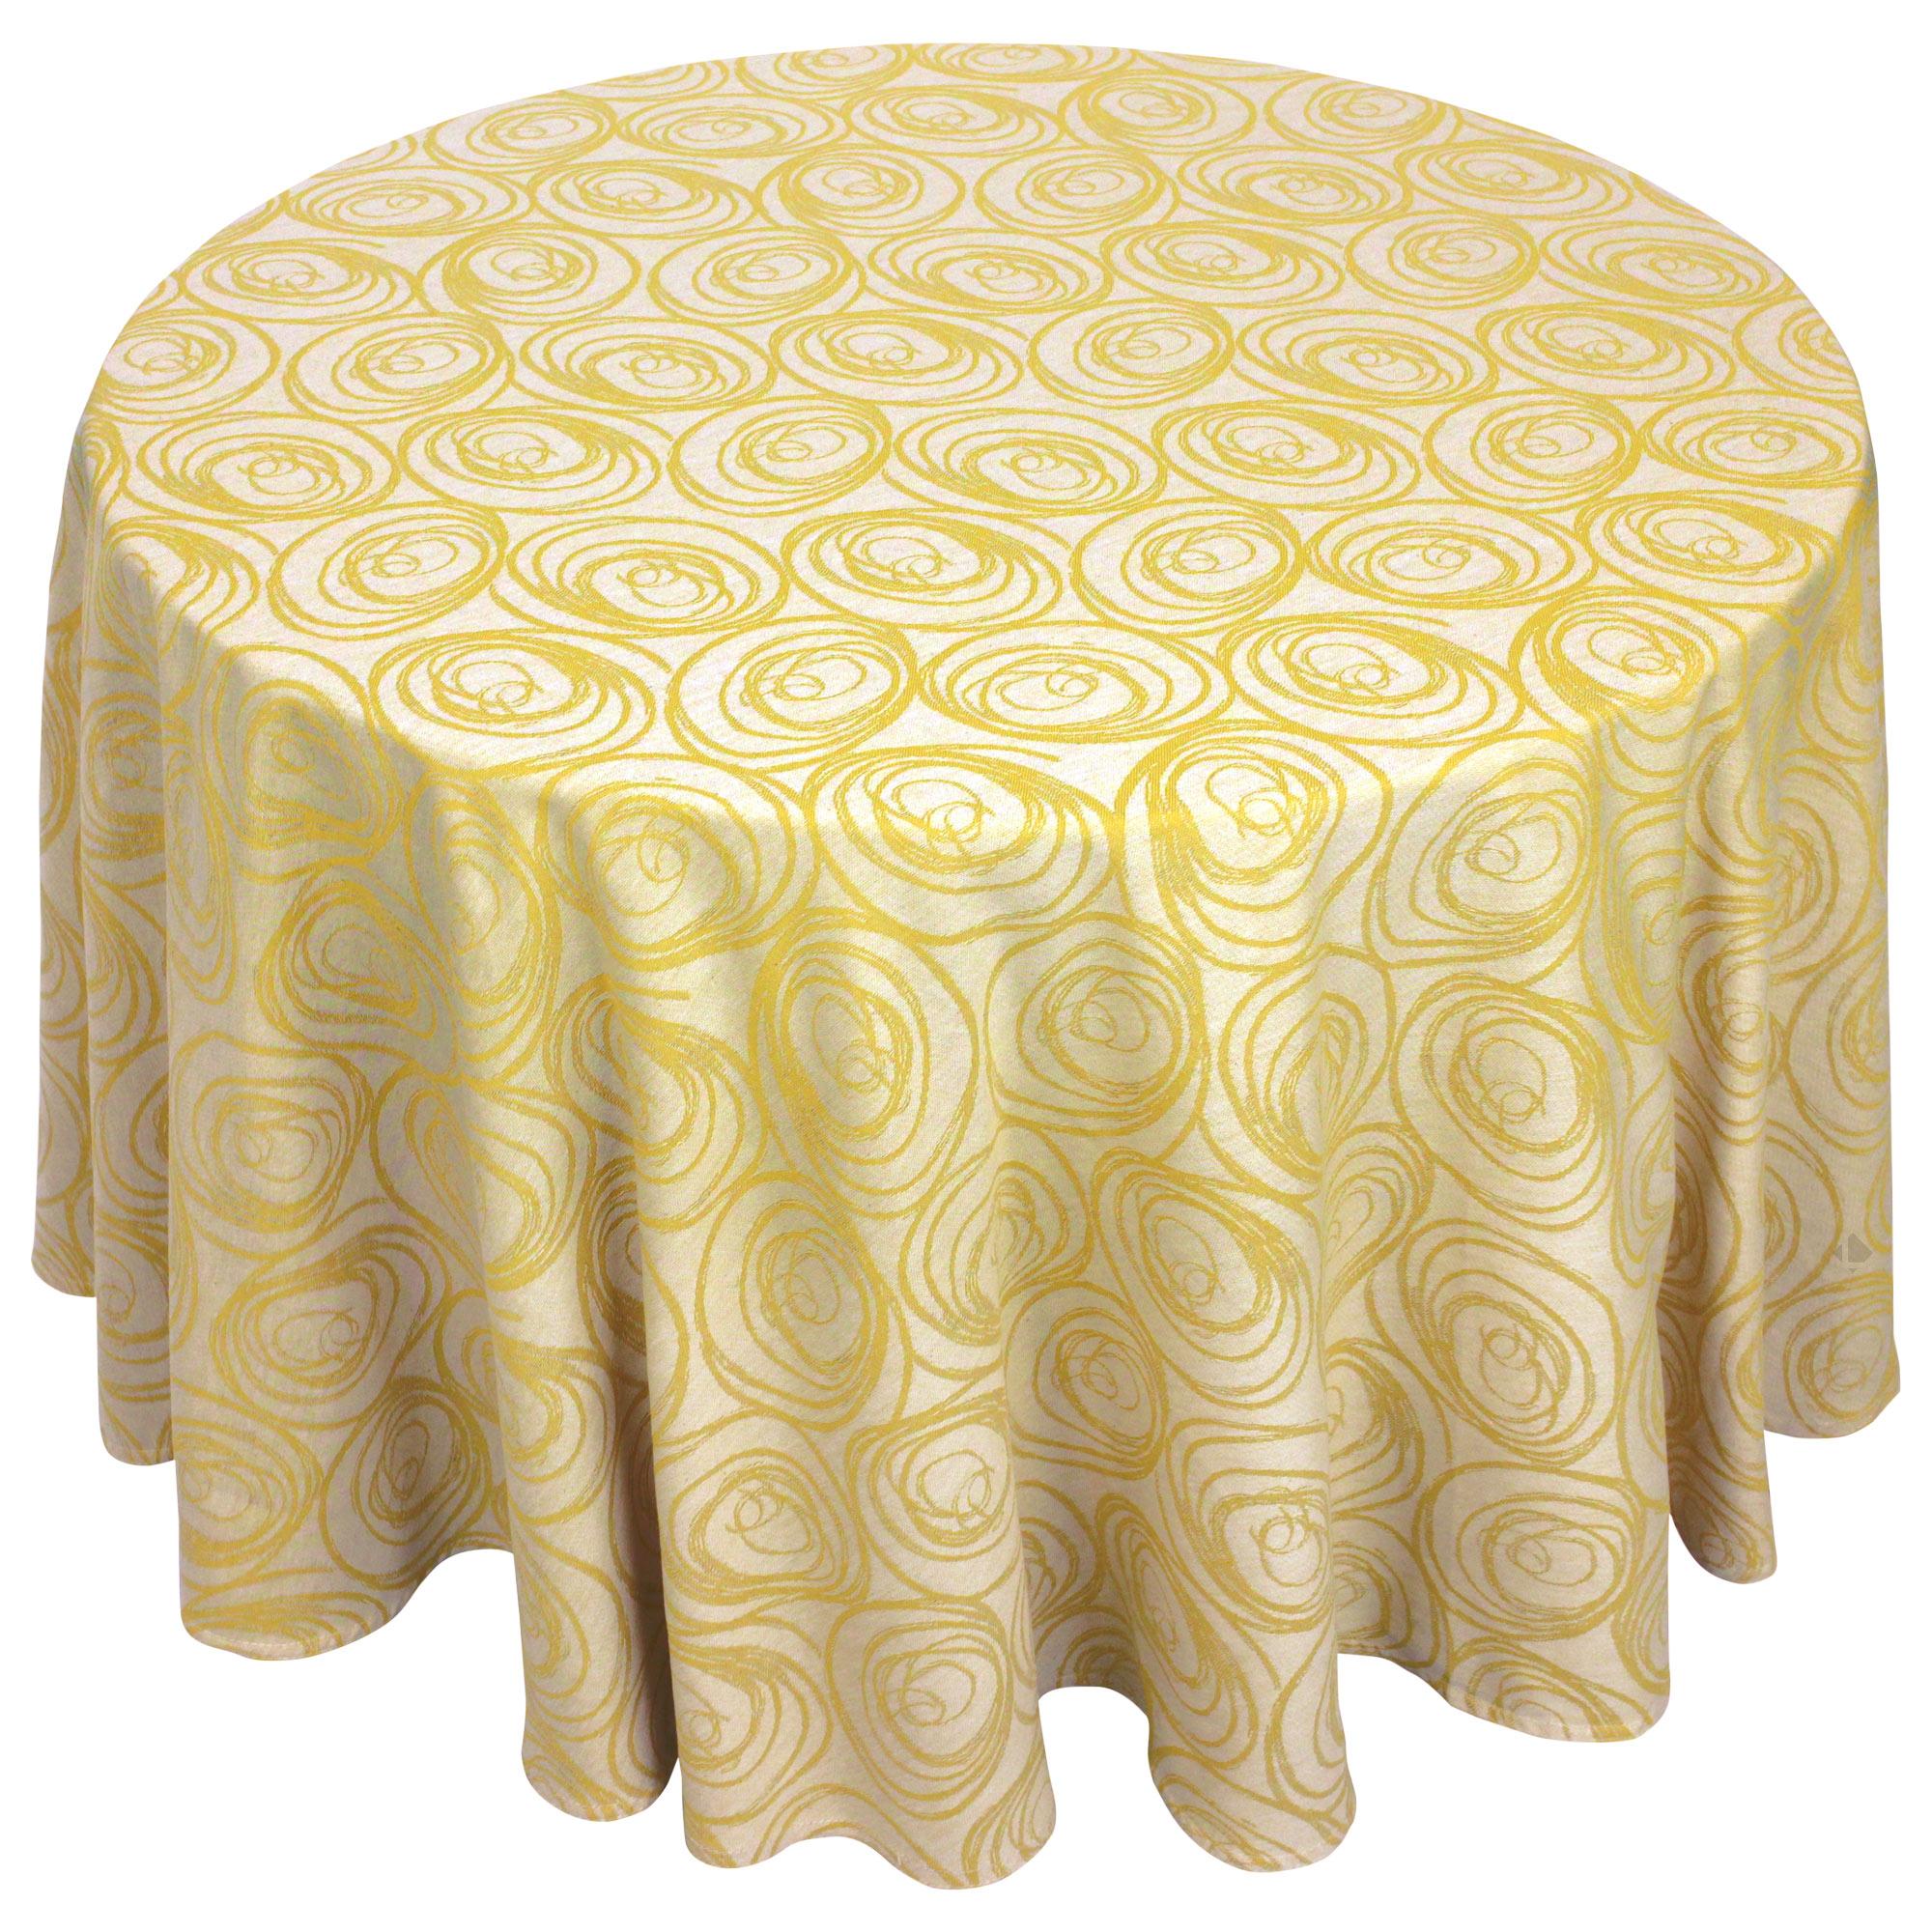 Nappe Paco Maïs polyester motifs triangles jaunes ovale 180x240